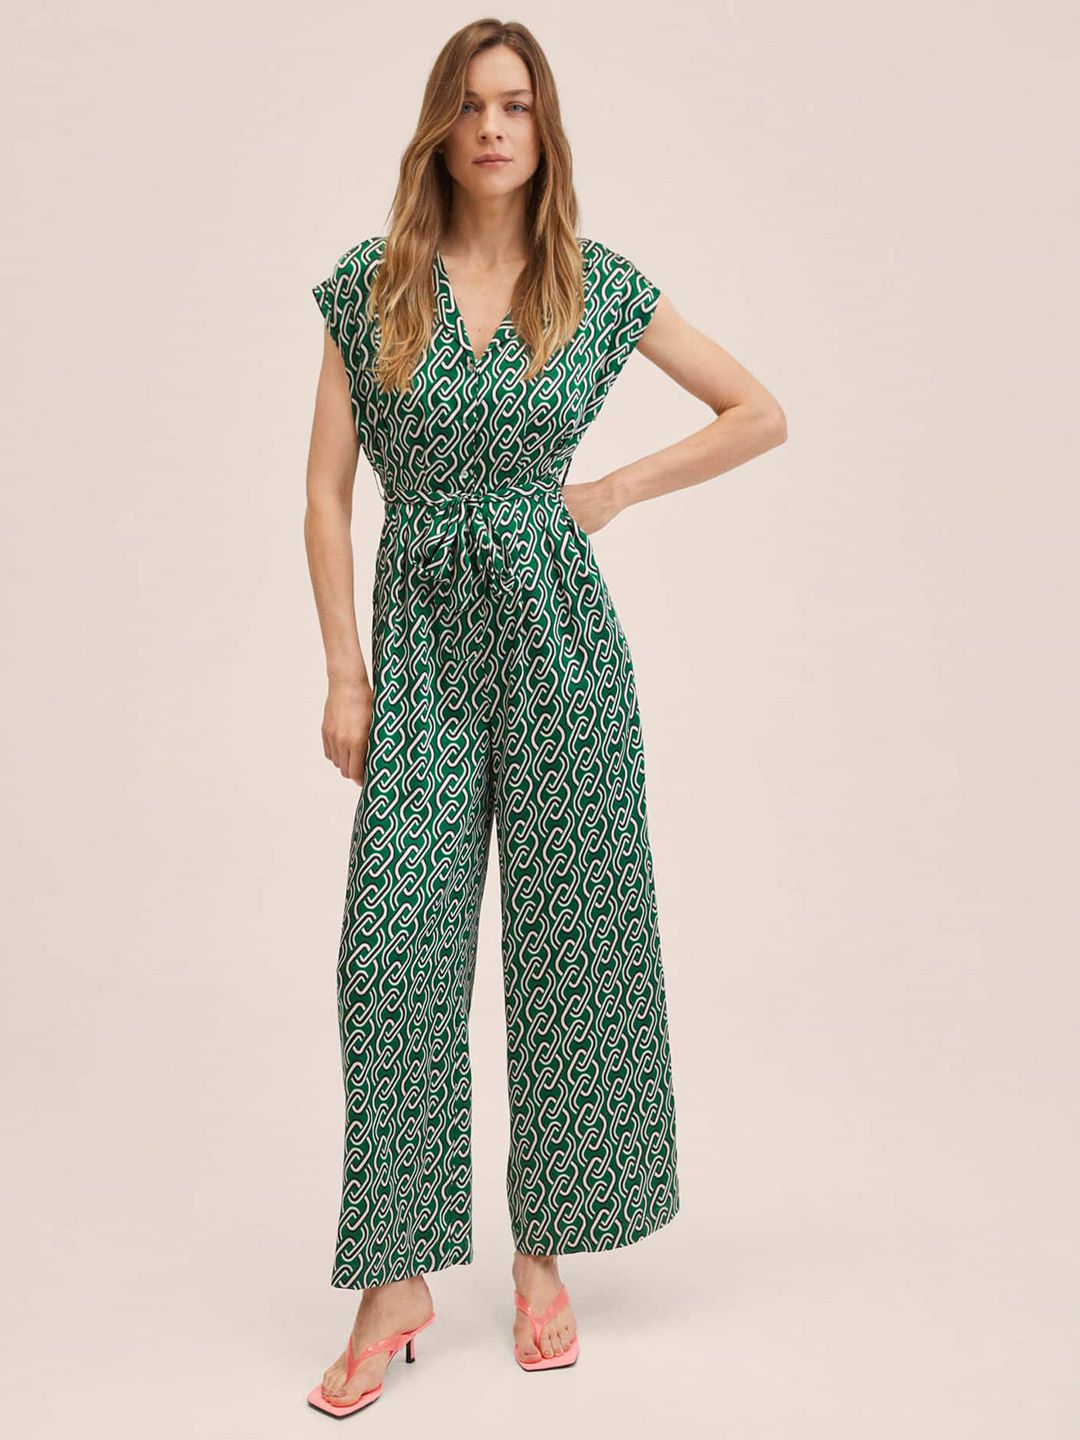 MANGO Green & Off White Printed Basic Jumpsuit with Belt Price in India